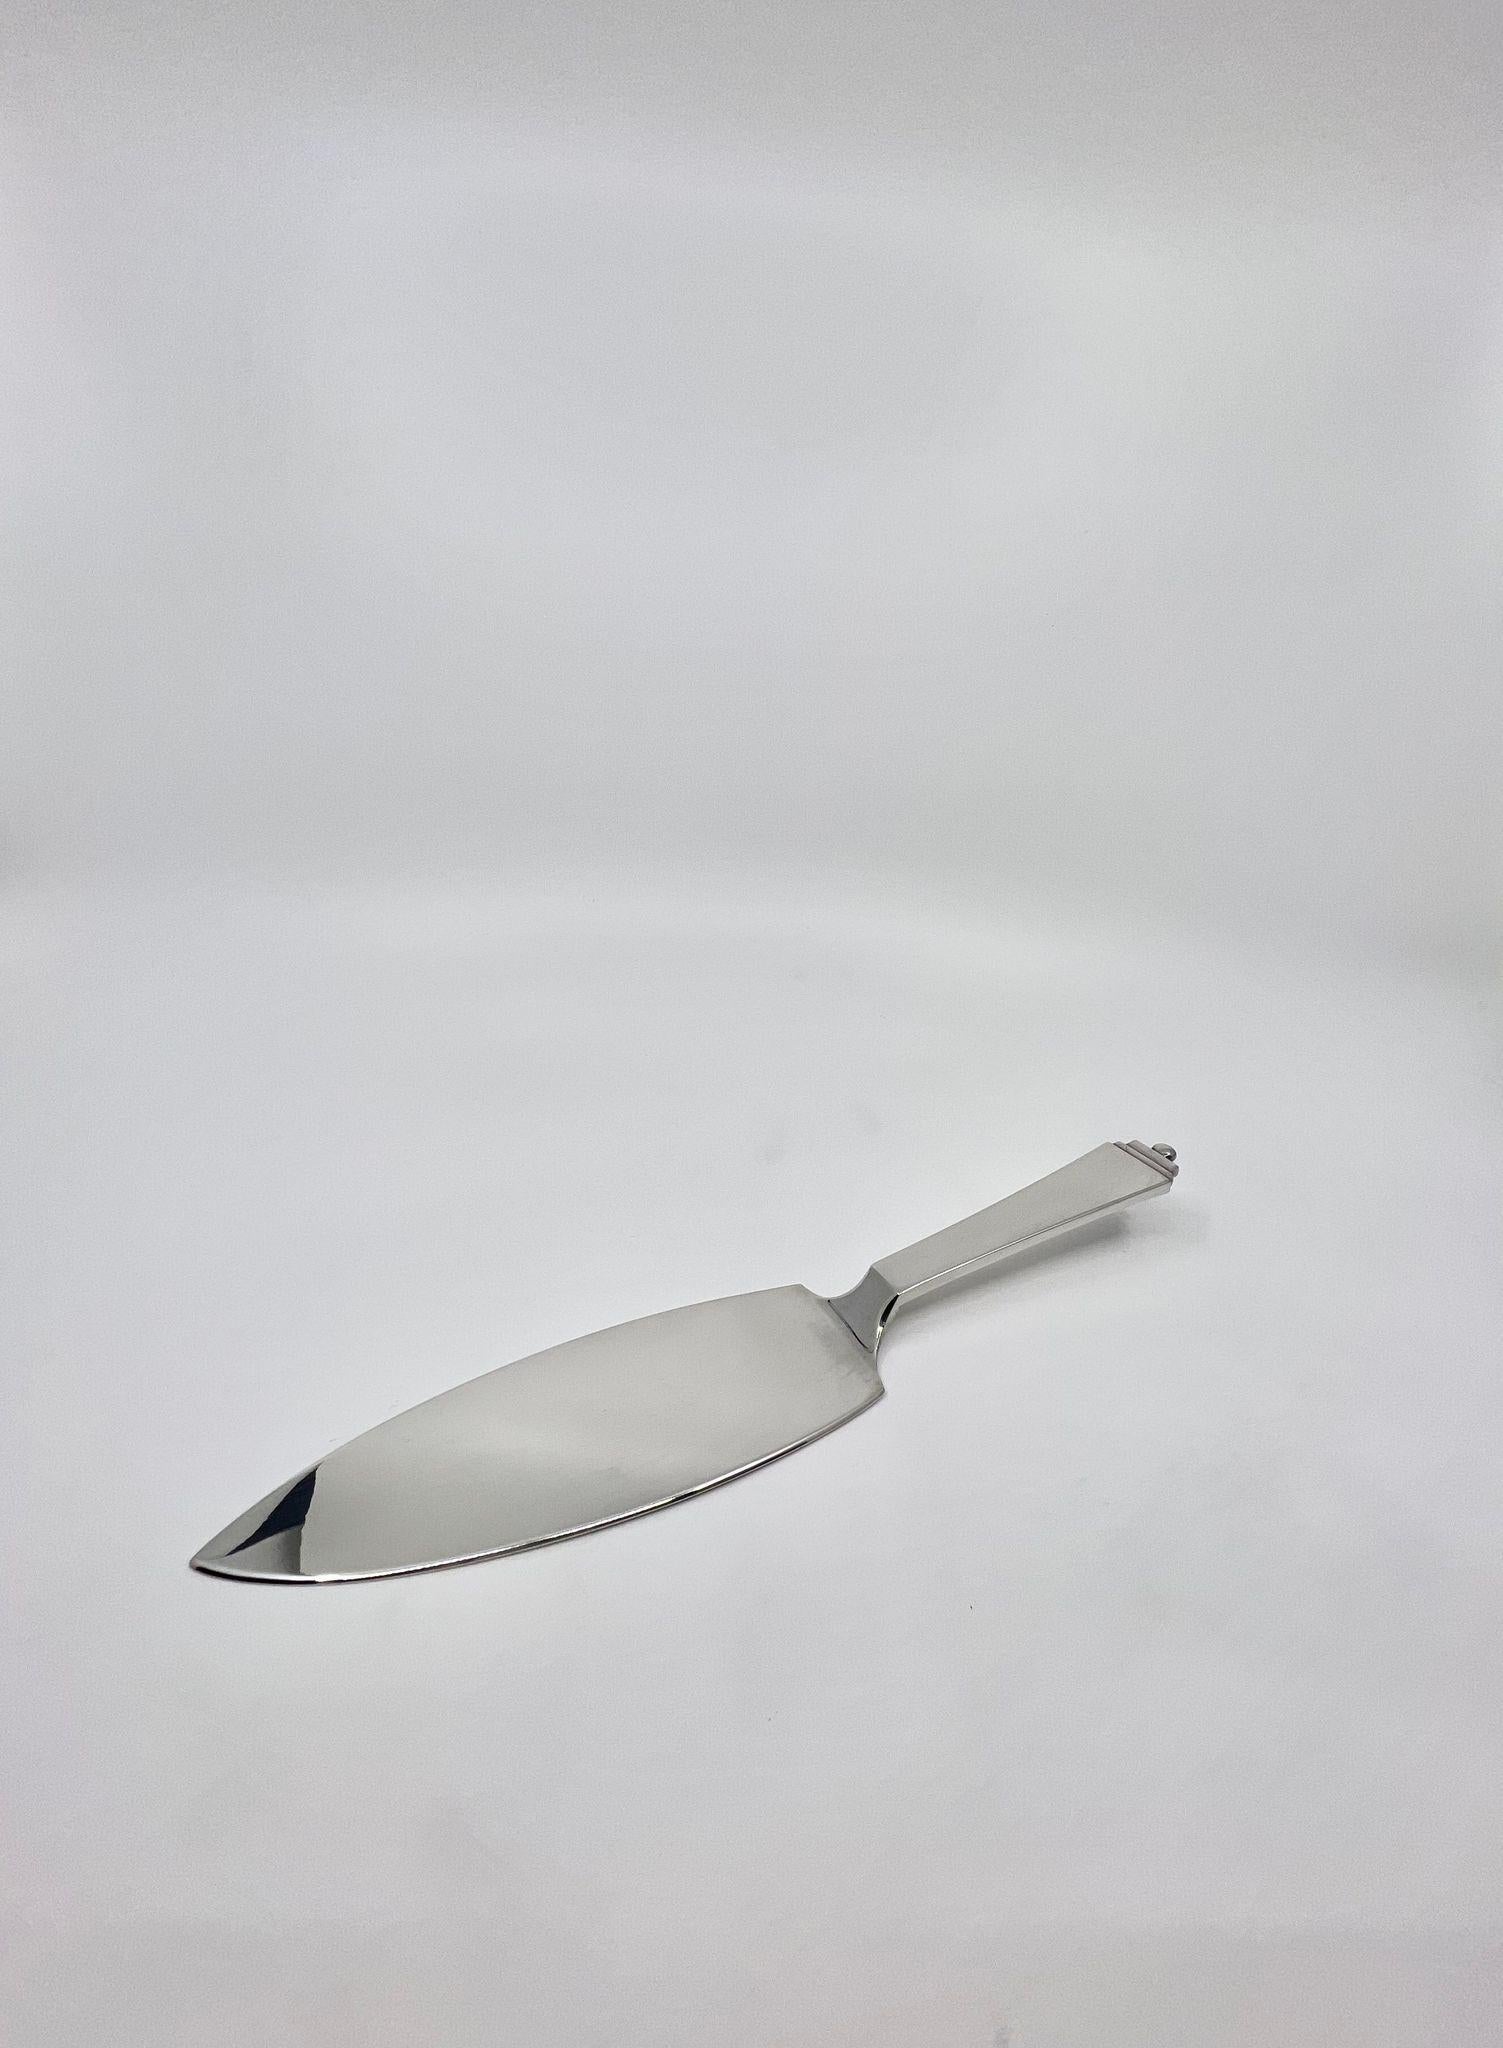 A large Georg Jensen sterling silver cake server in the Pyramid pattern, design #15 by Harald Nielsen from 1926. This piece is larger than a normal 192-cake server.

Dimensions: Measures 9 1/8